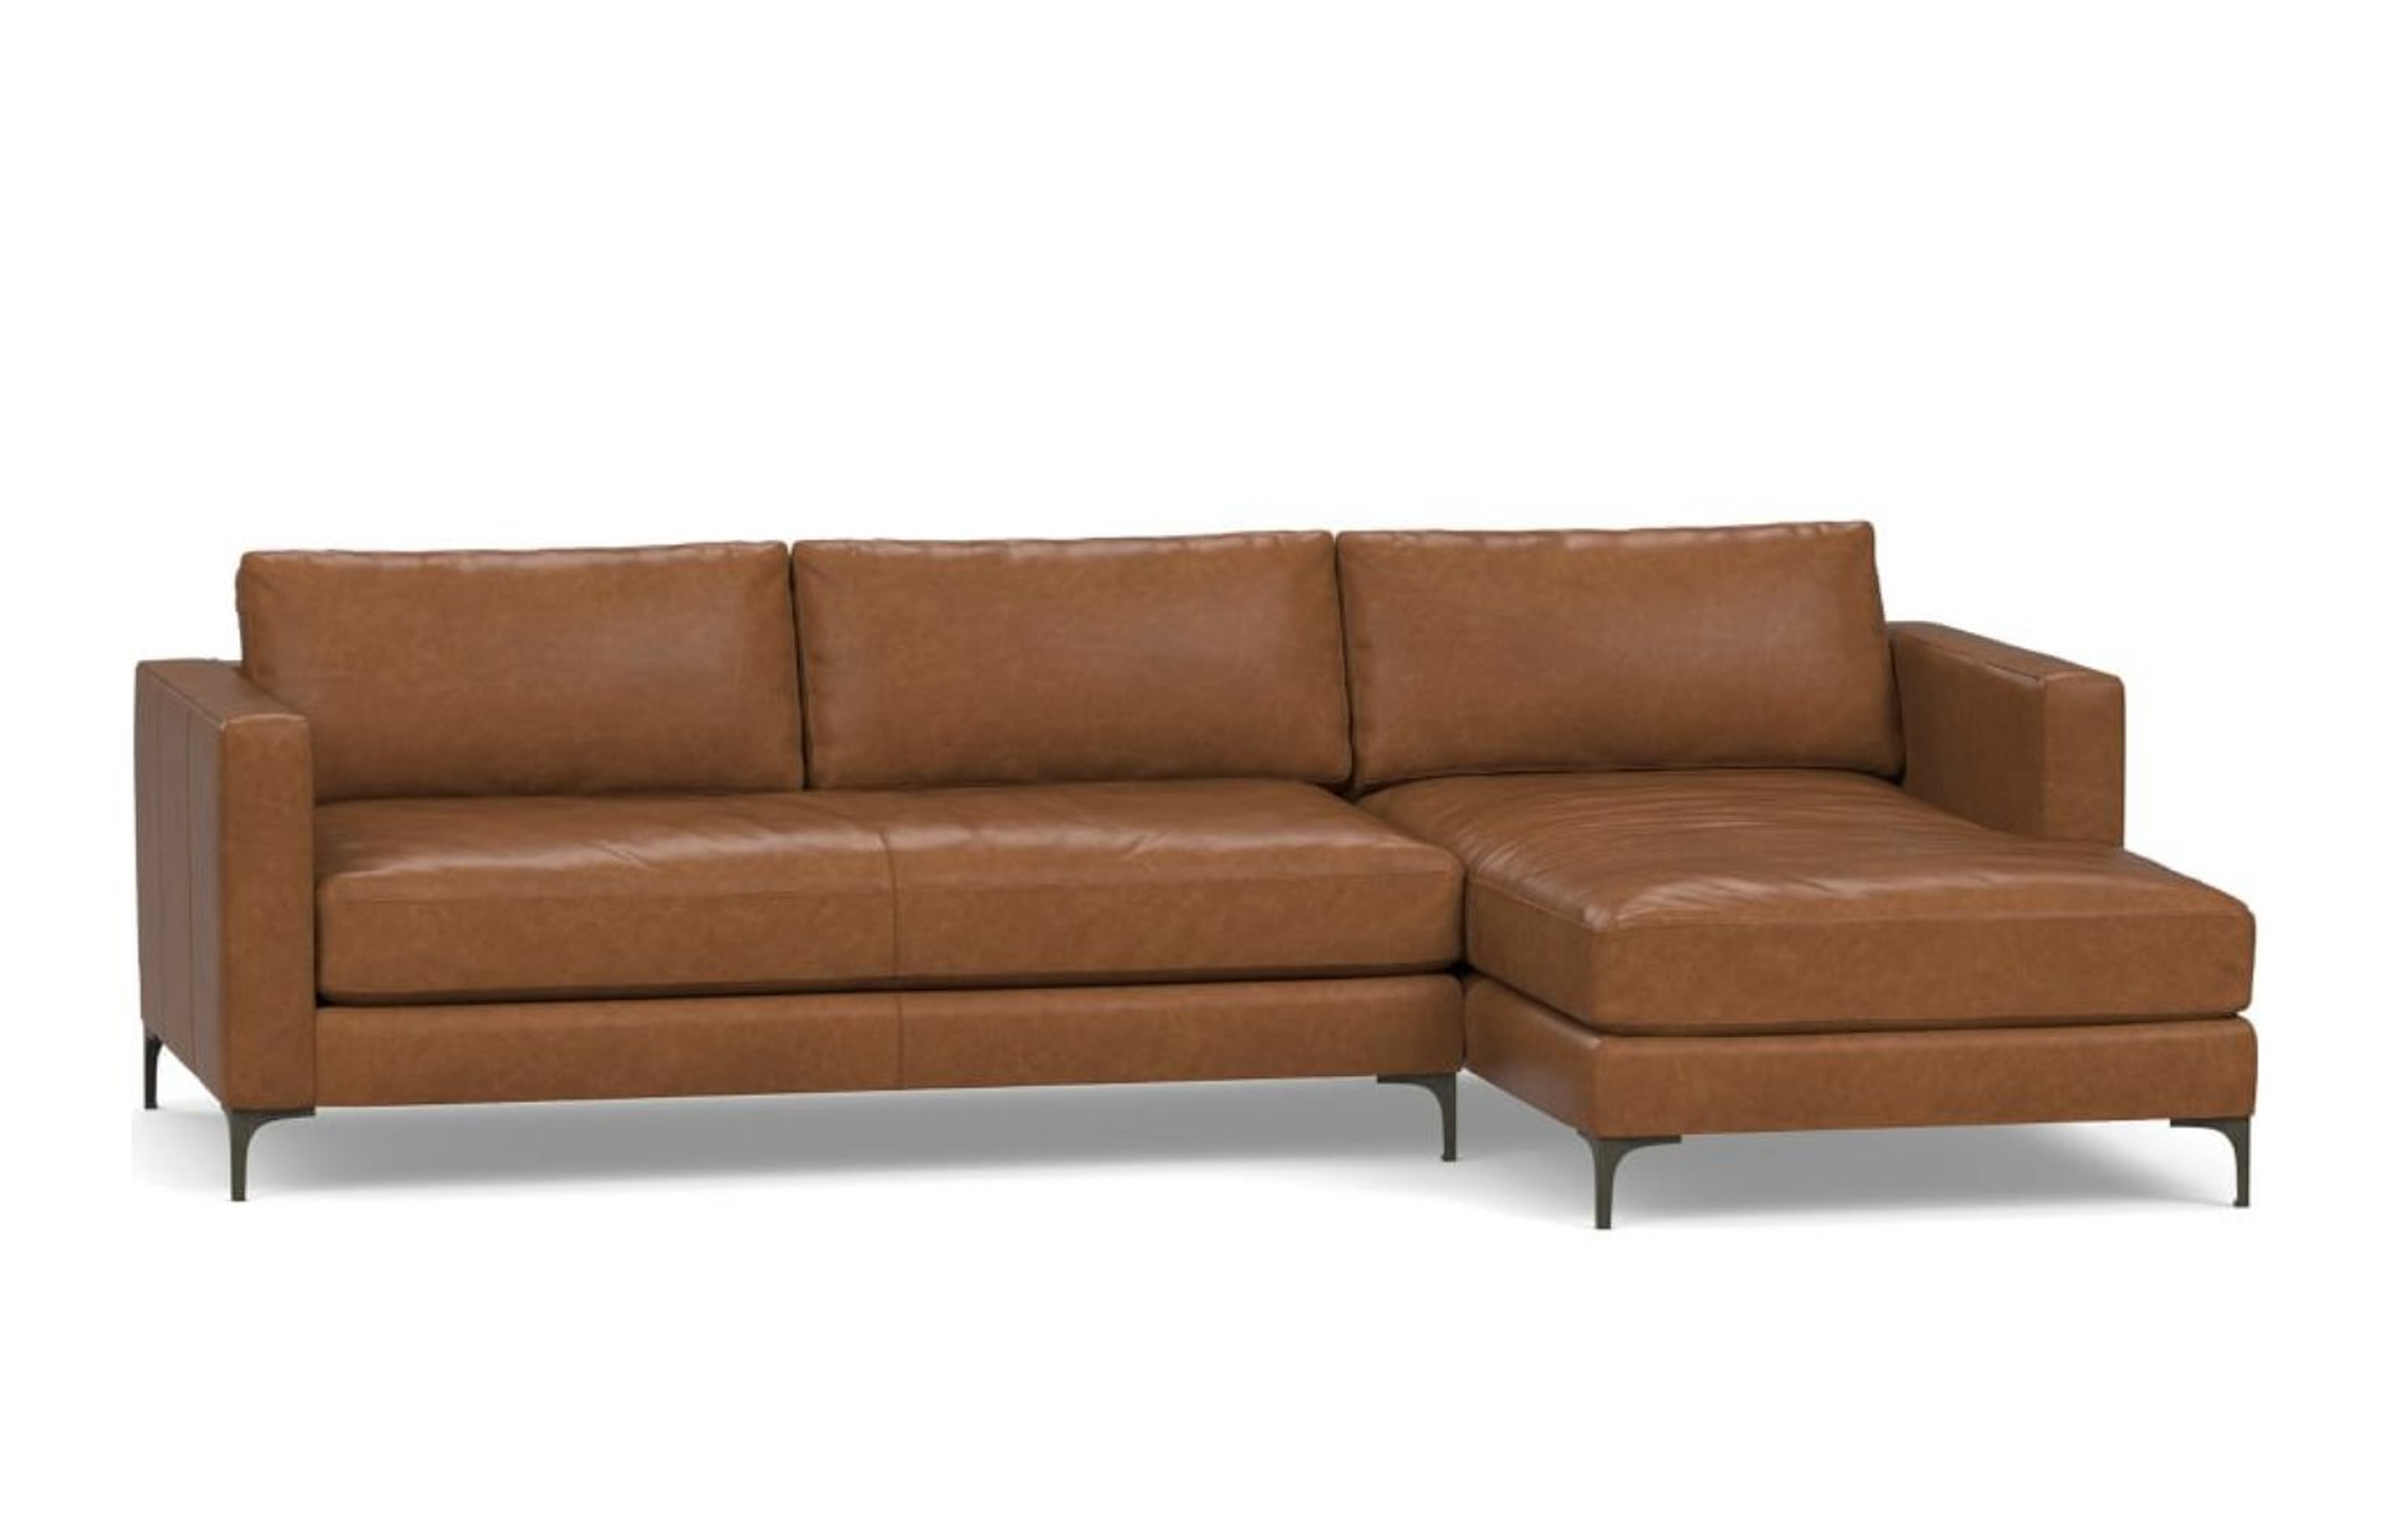 Jake Leather Right Arm Loveseat with Chaise Sectional, Bench Cushion and Bronze Legs, Down Blend Wrapped Cushions, Statesville Caramel - Pottery Barn